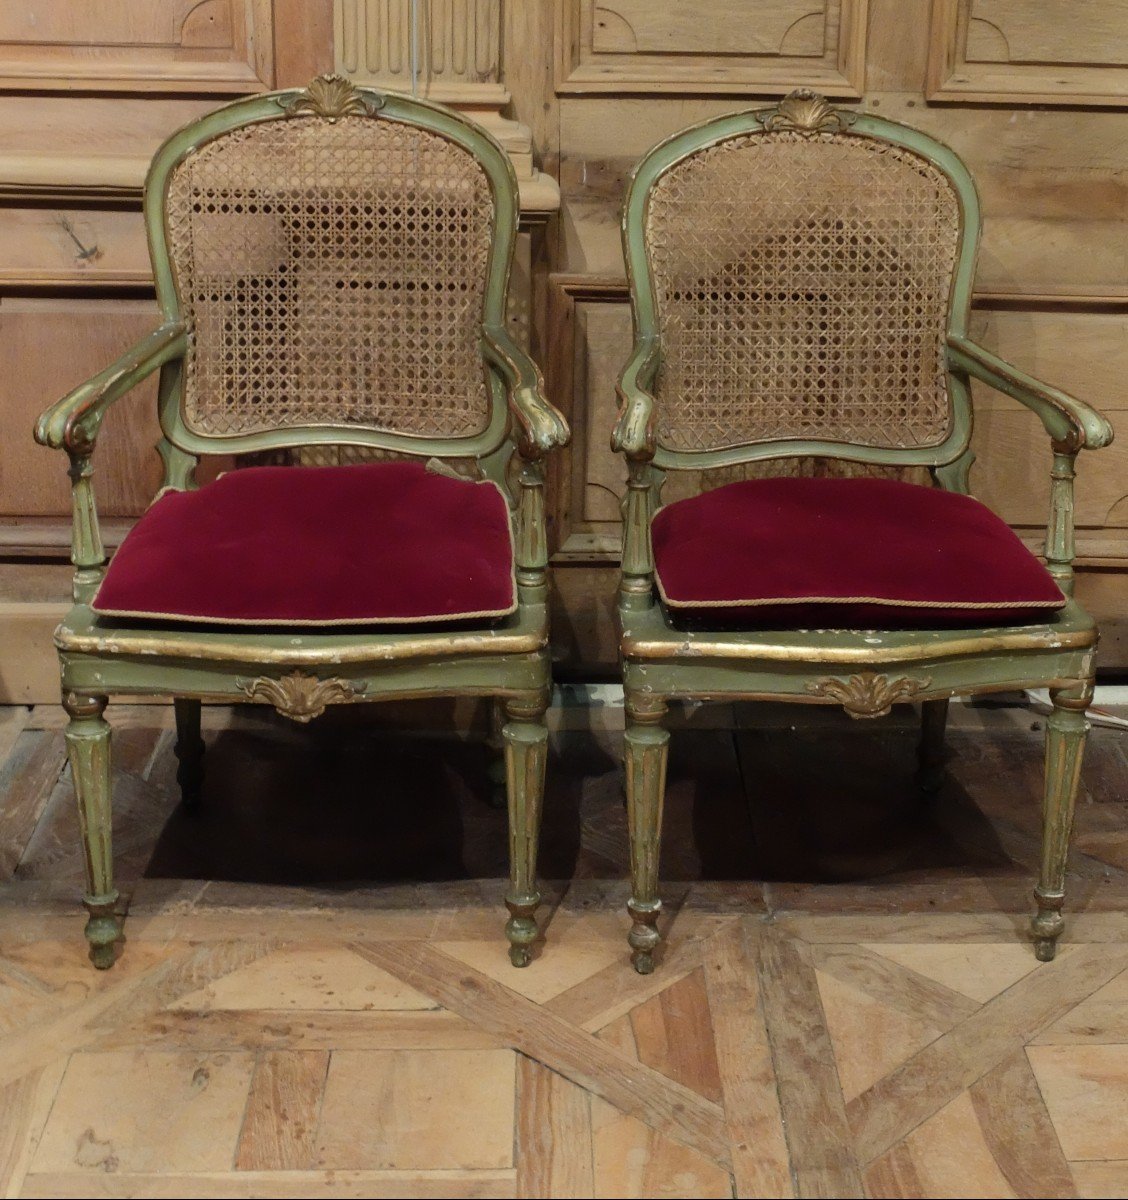 Pair Of Cane Armchairs In Gold Rechampi Lacquered Wood. Italy 18th Century Period.